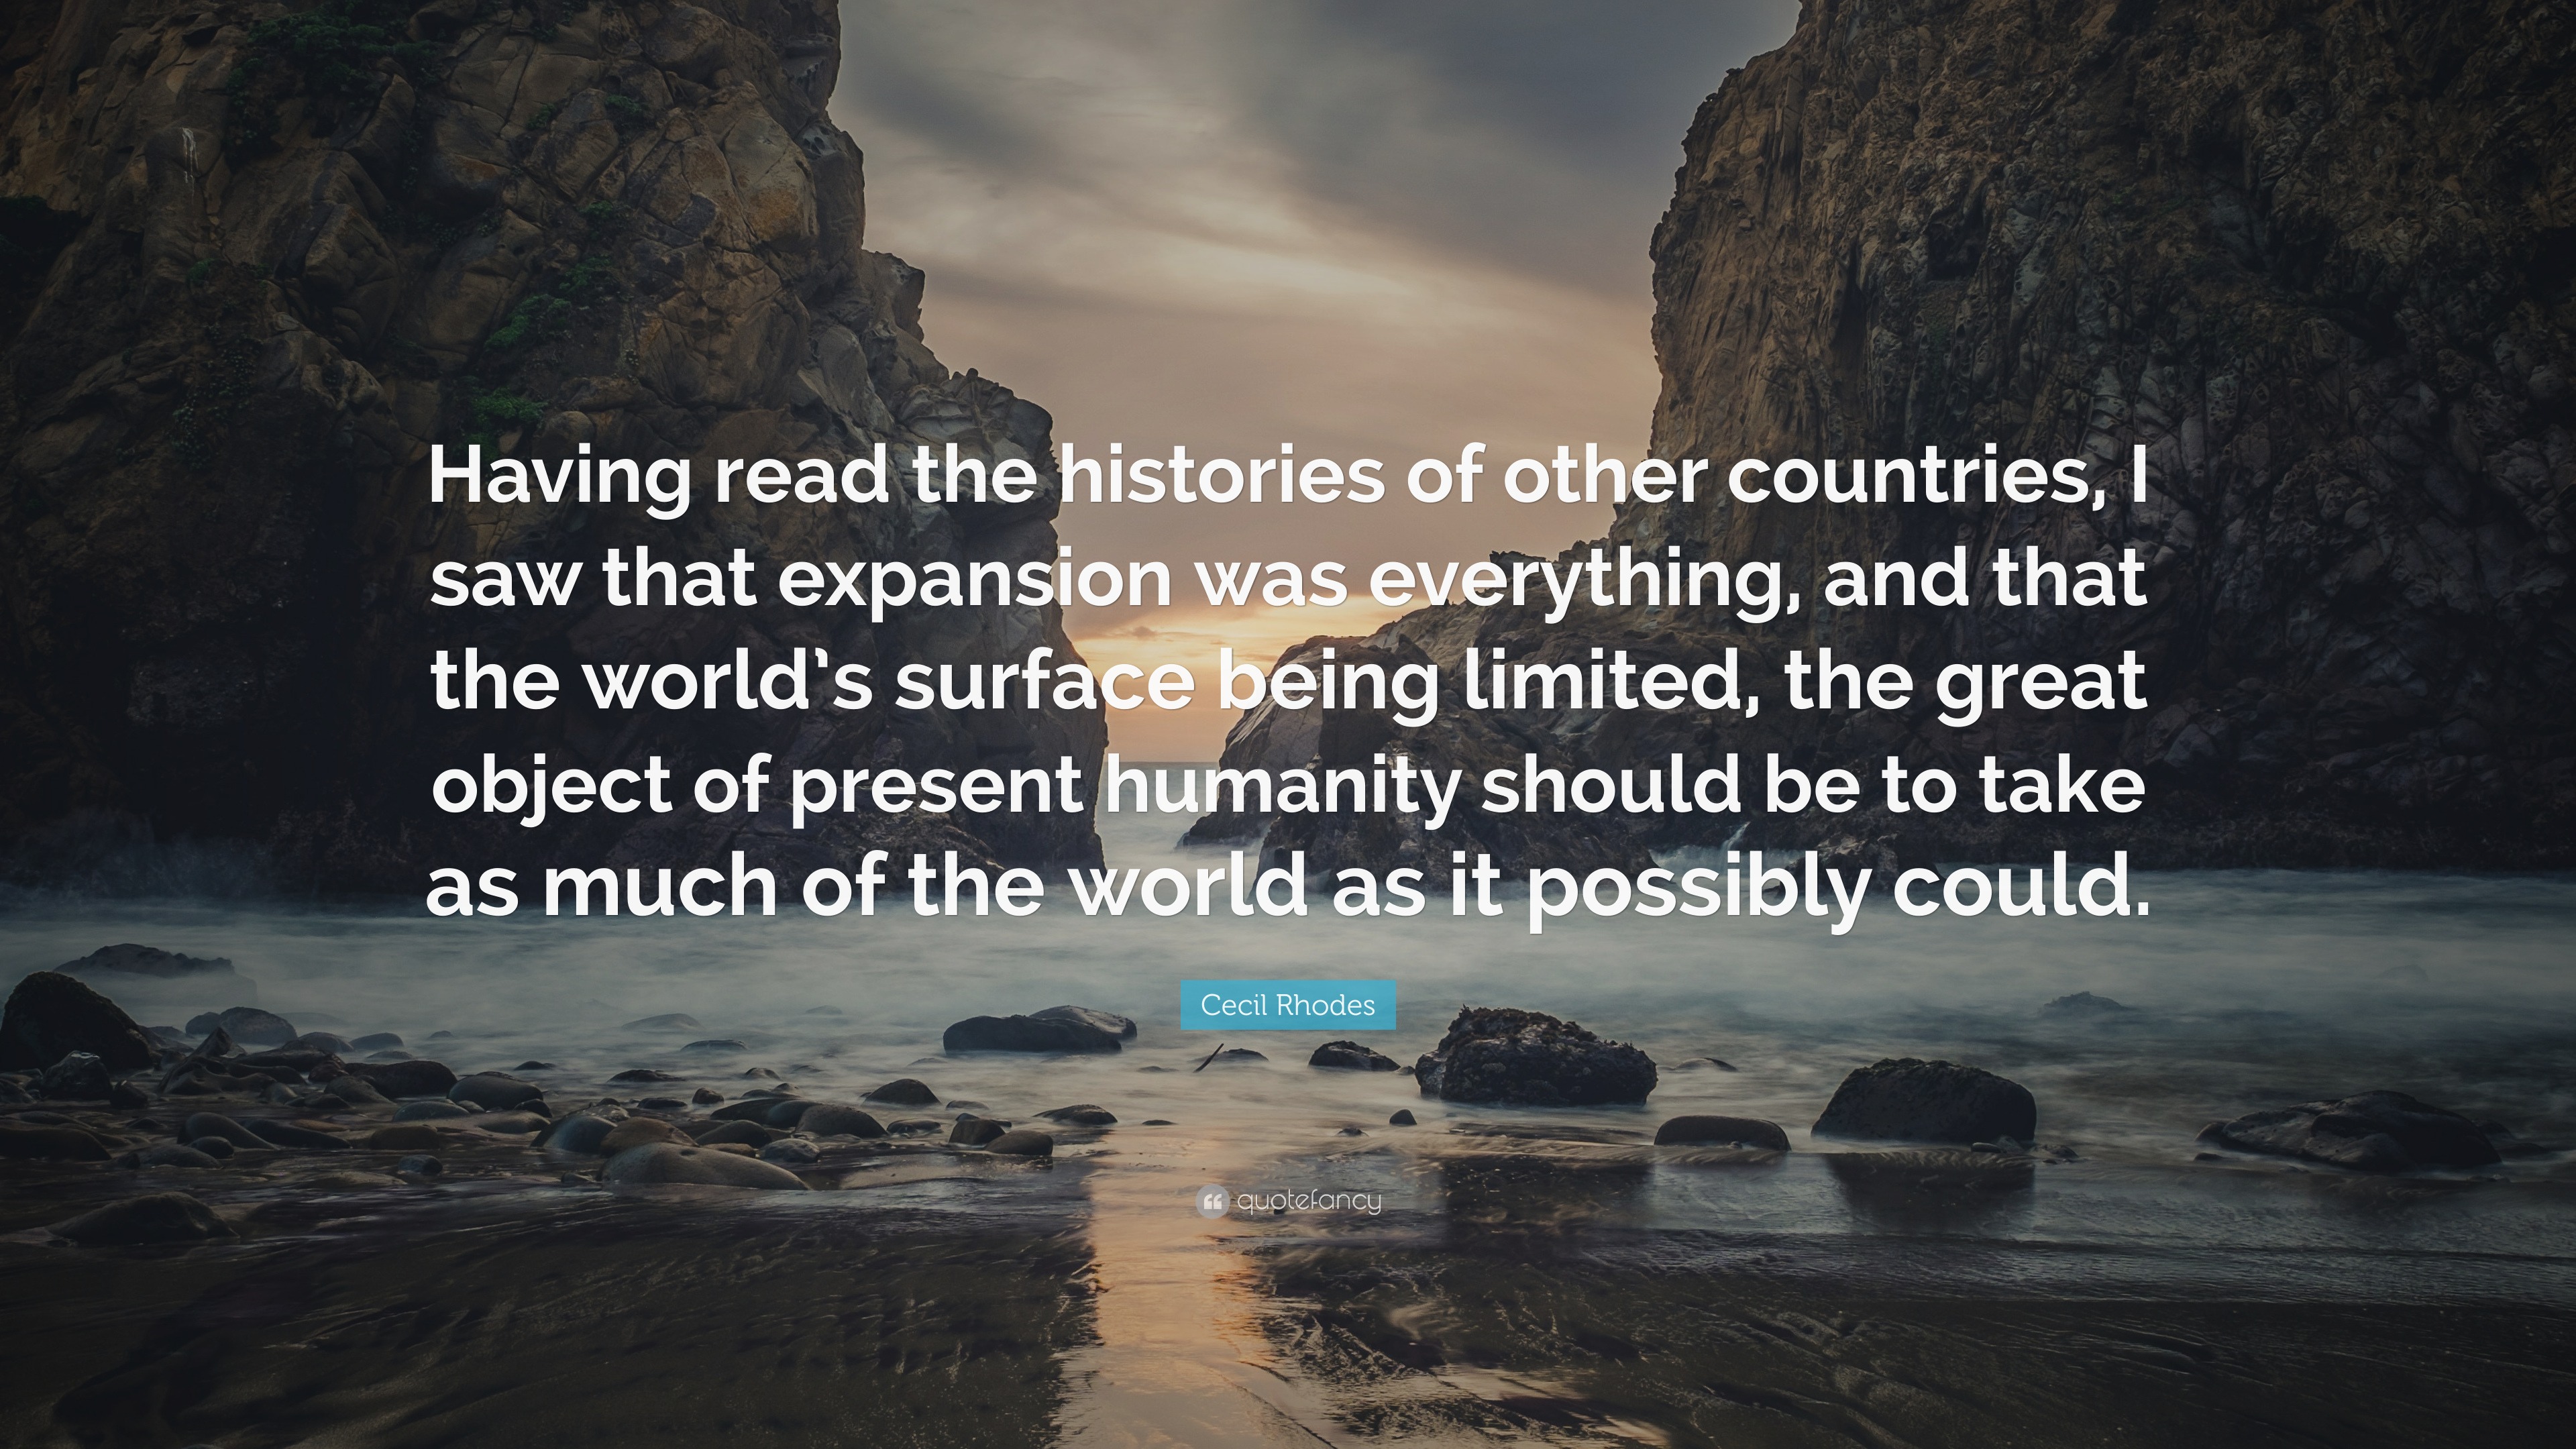 Cecil Rhodes Quote: "Having read the histories of other countries, I s...